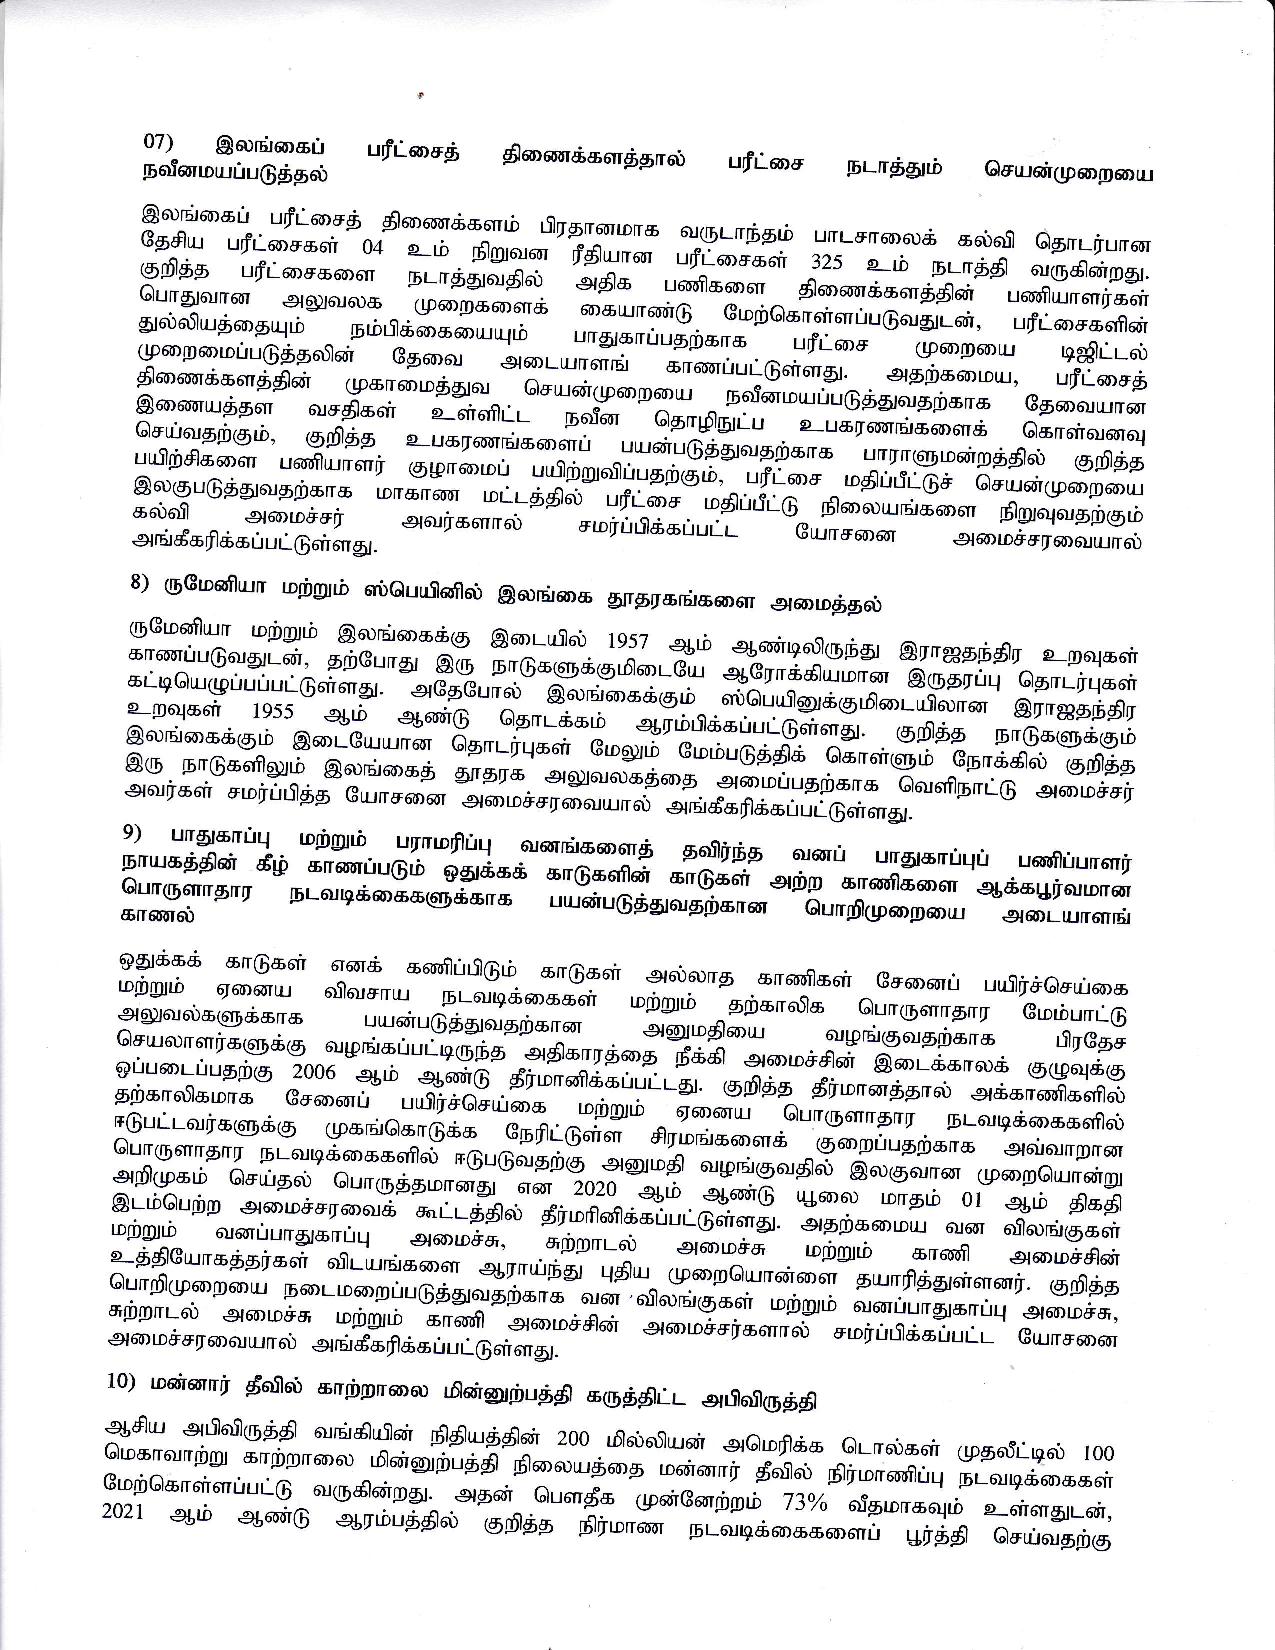 Cabinet Decision on 26.10.2020 Tamil page 003